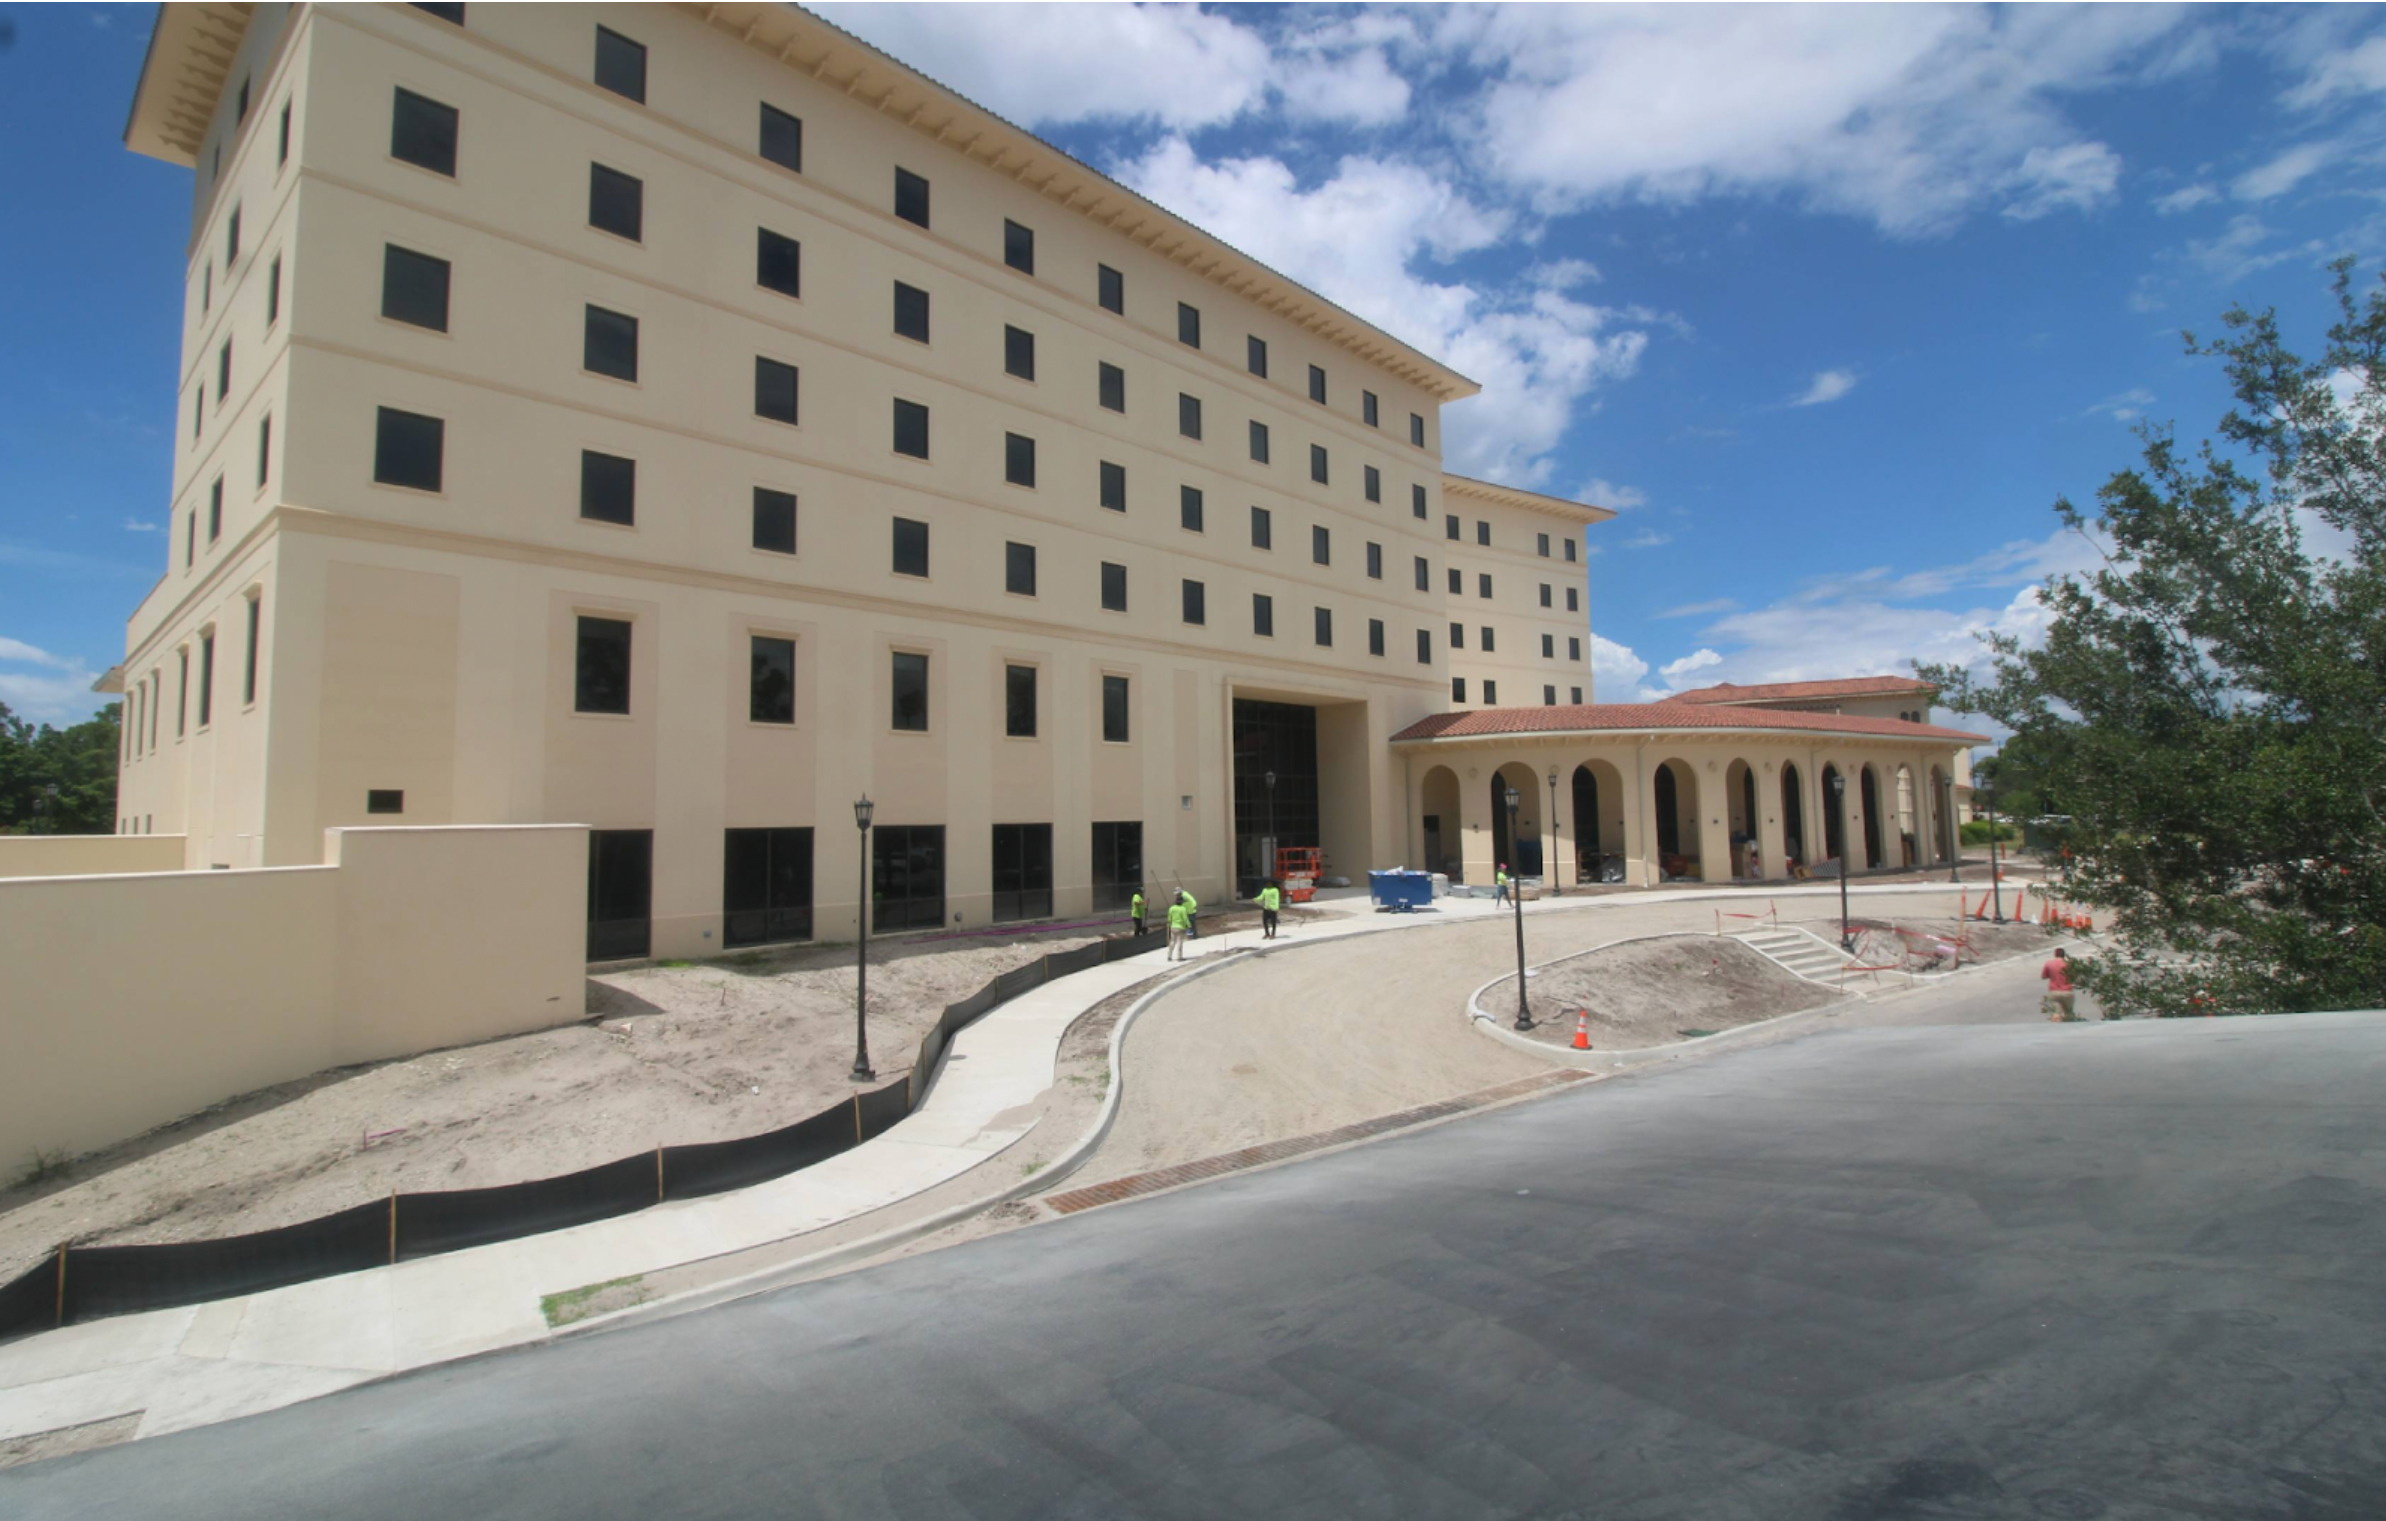 New USF residential hall at the Sarasota-Manatee campus to open in August